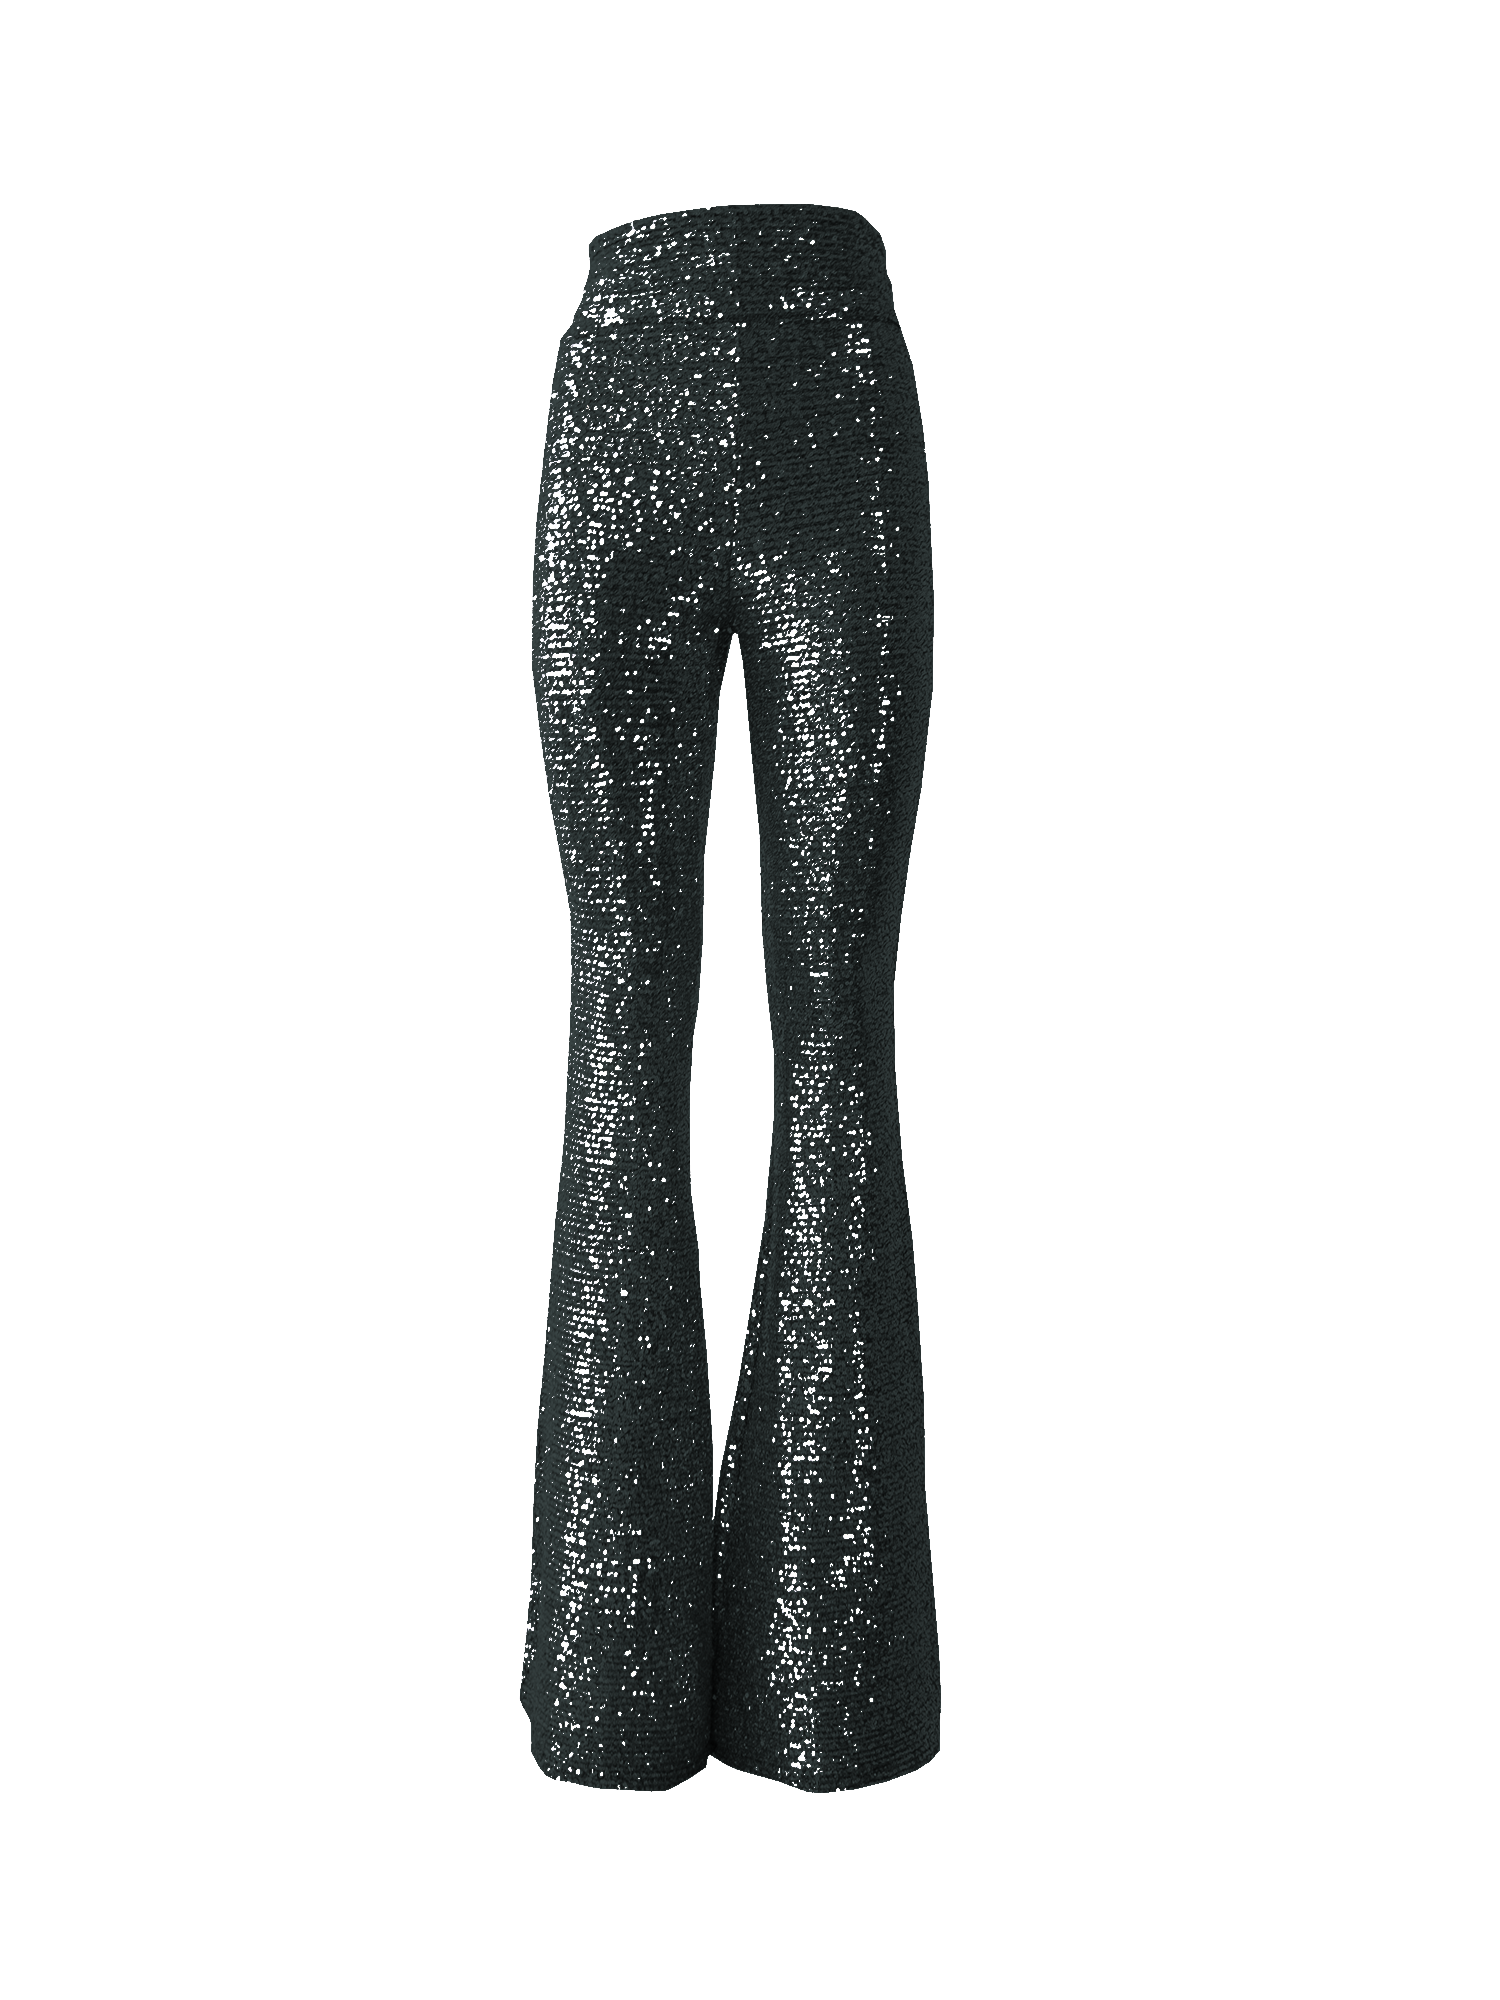 LOLA - flared pants in black sequins